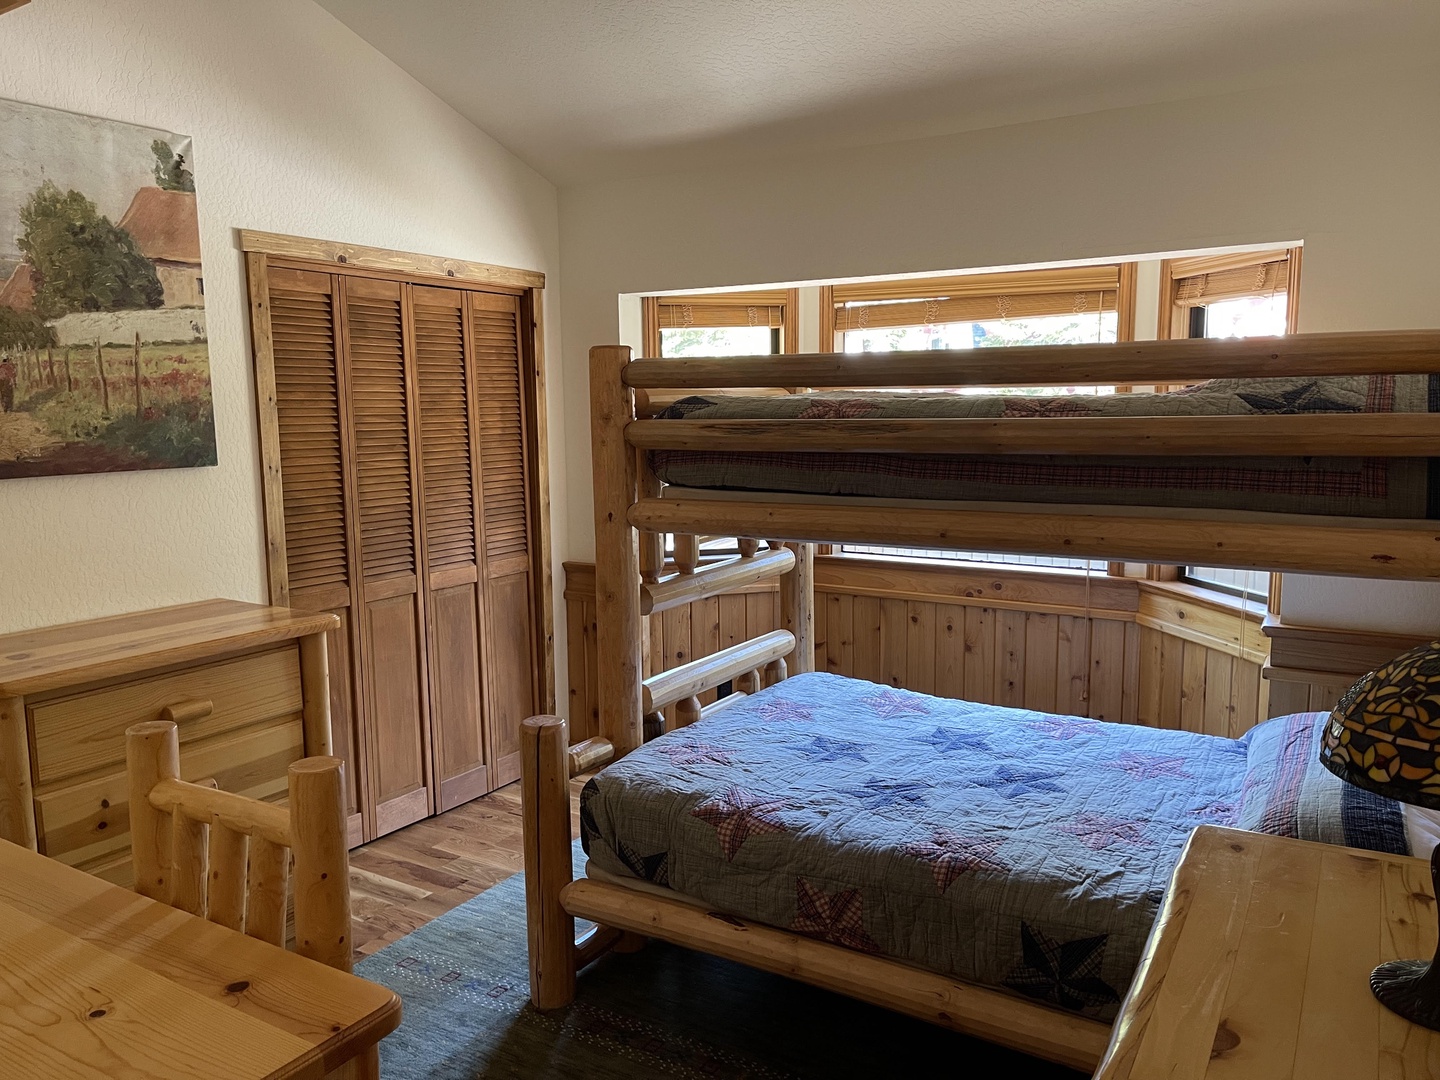 5th Bedroom: 1 bunk bed (1 full 1 twin)